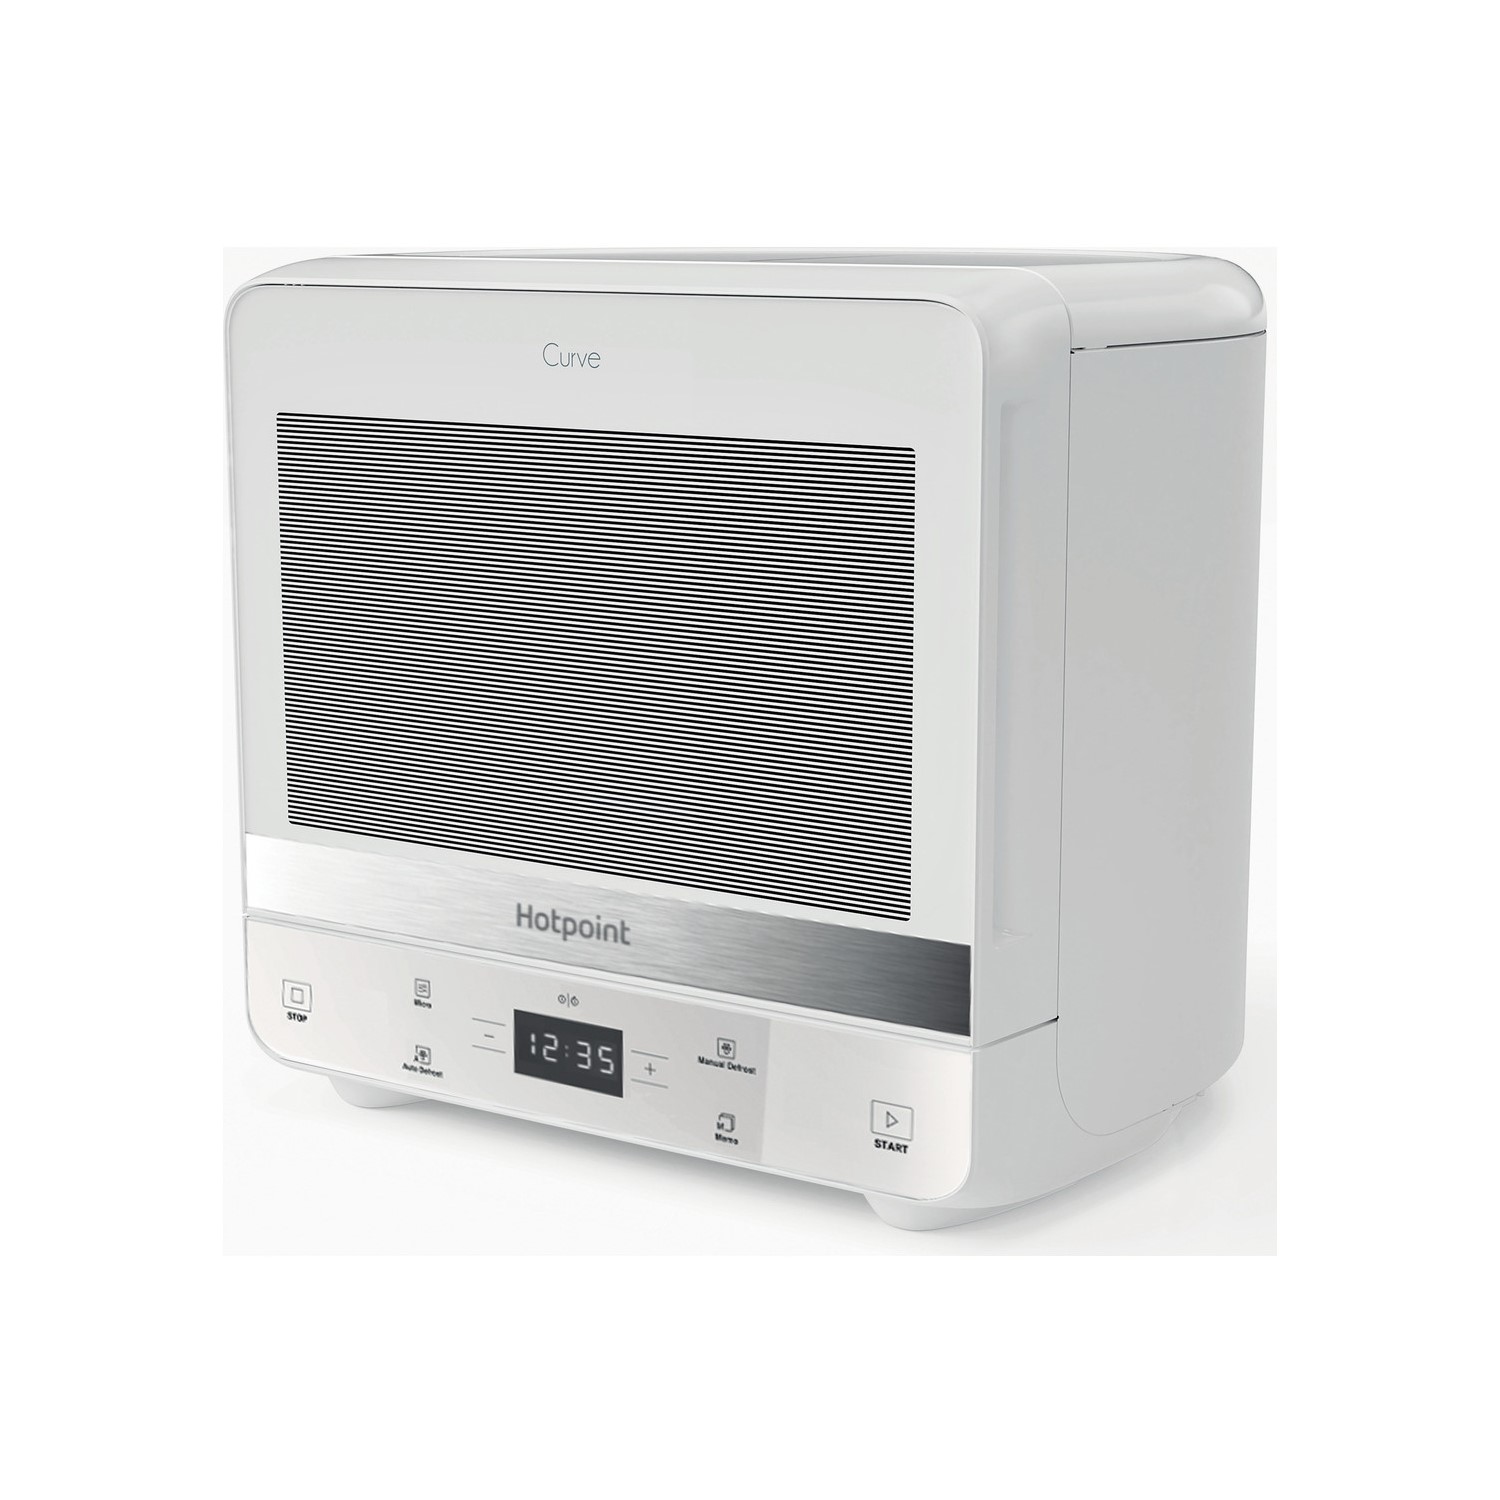 Hotpoint Extraspace Curve 13L Digital Microwave Oven - White